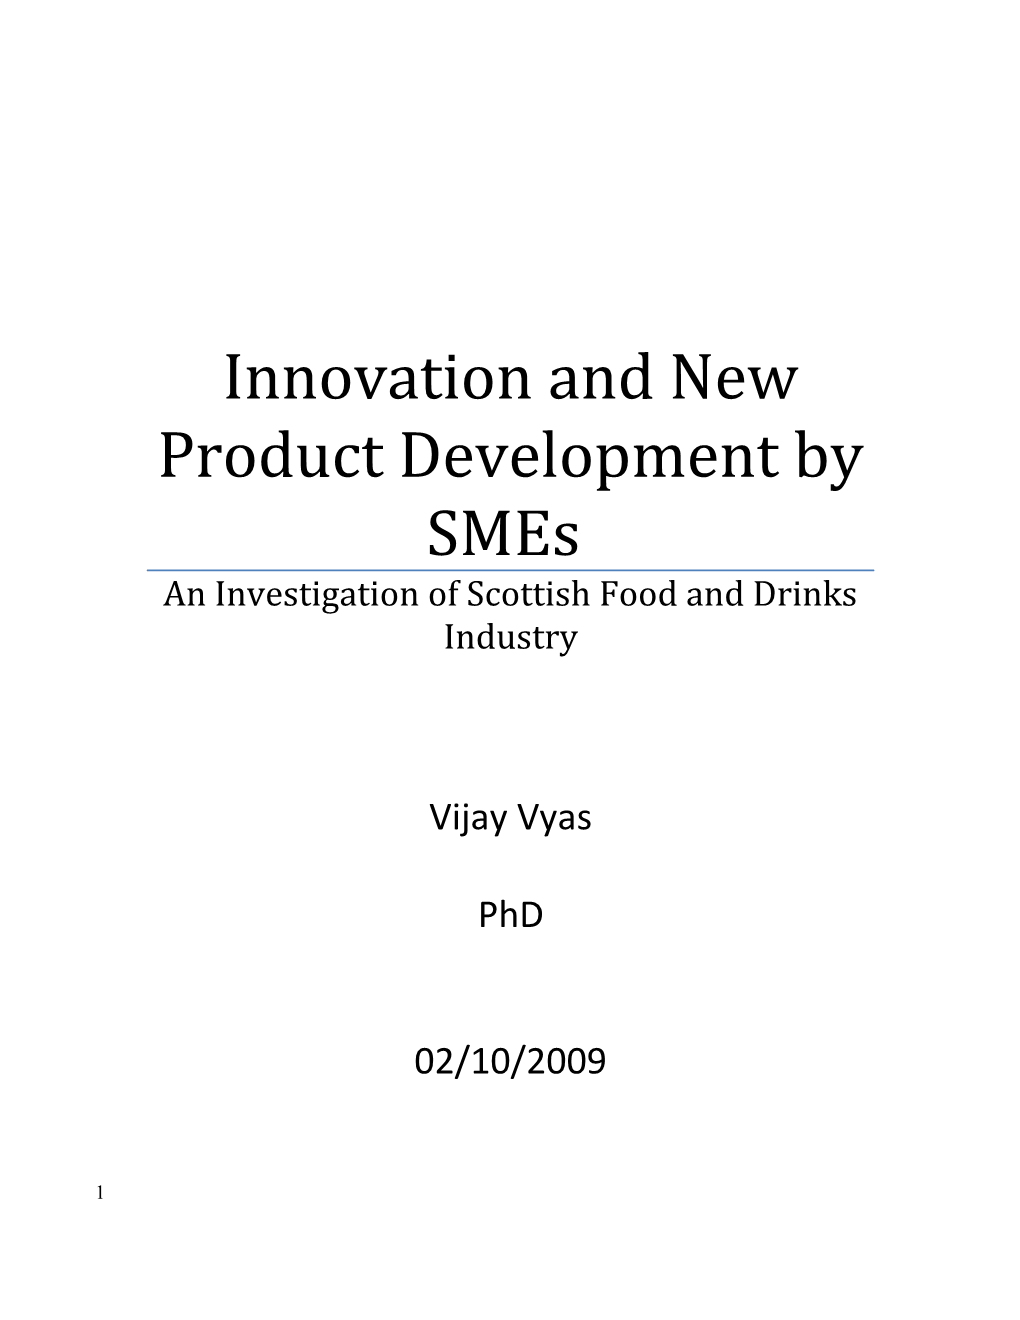 Innovation and New Product Development by Smes